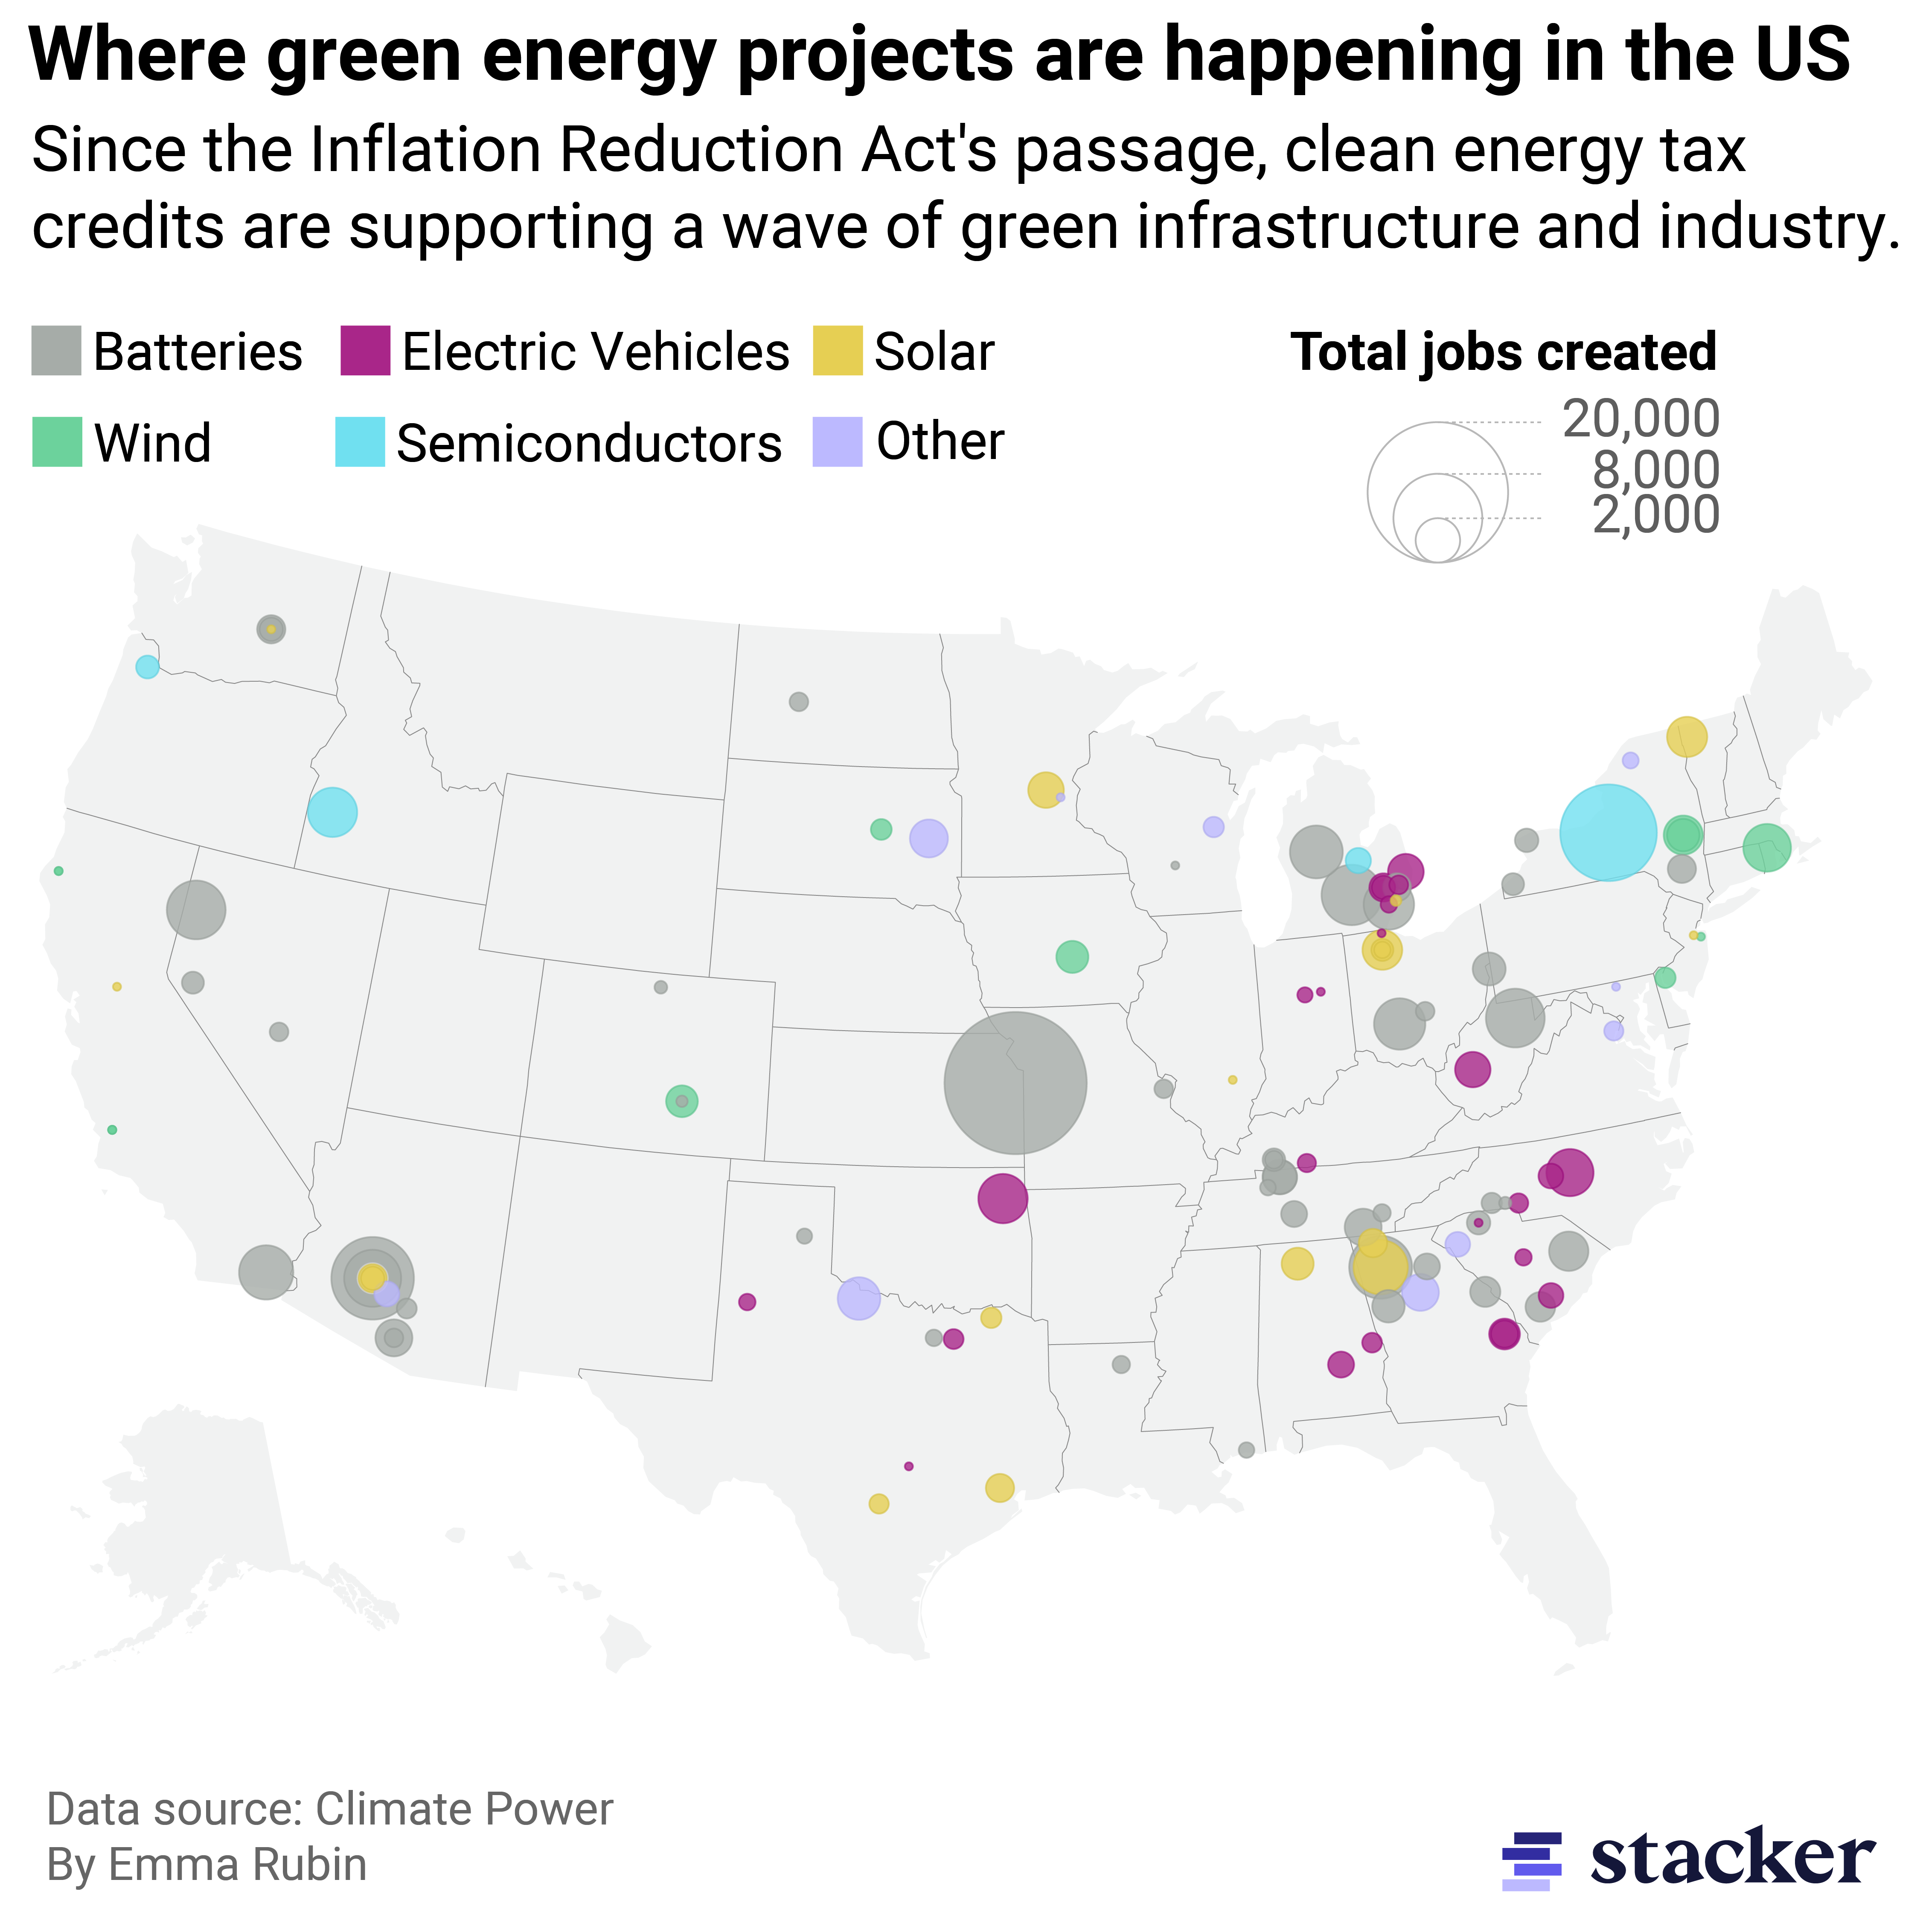 Map of green energy projects announced since the IRA passed.